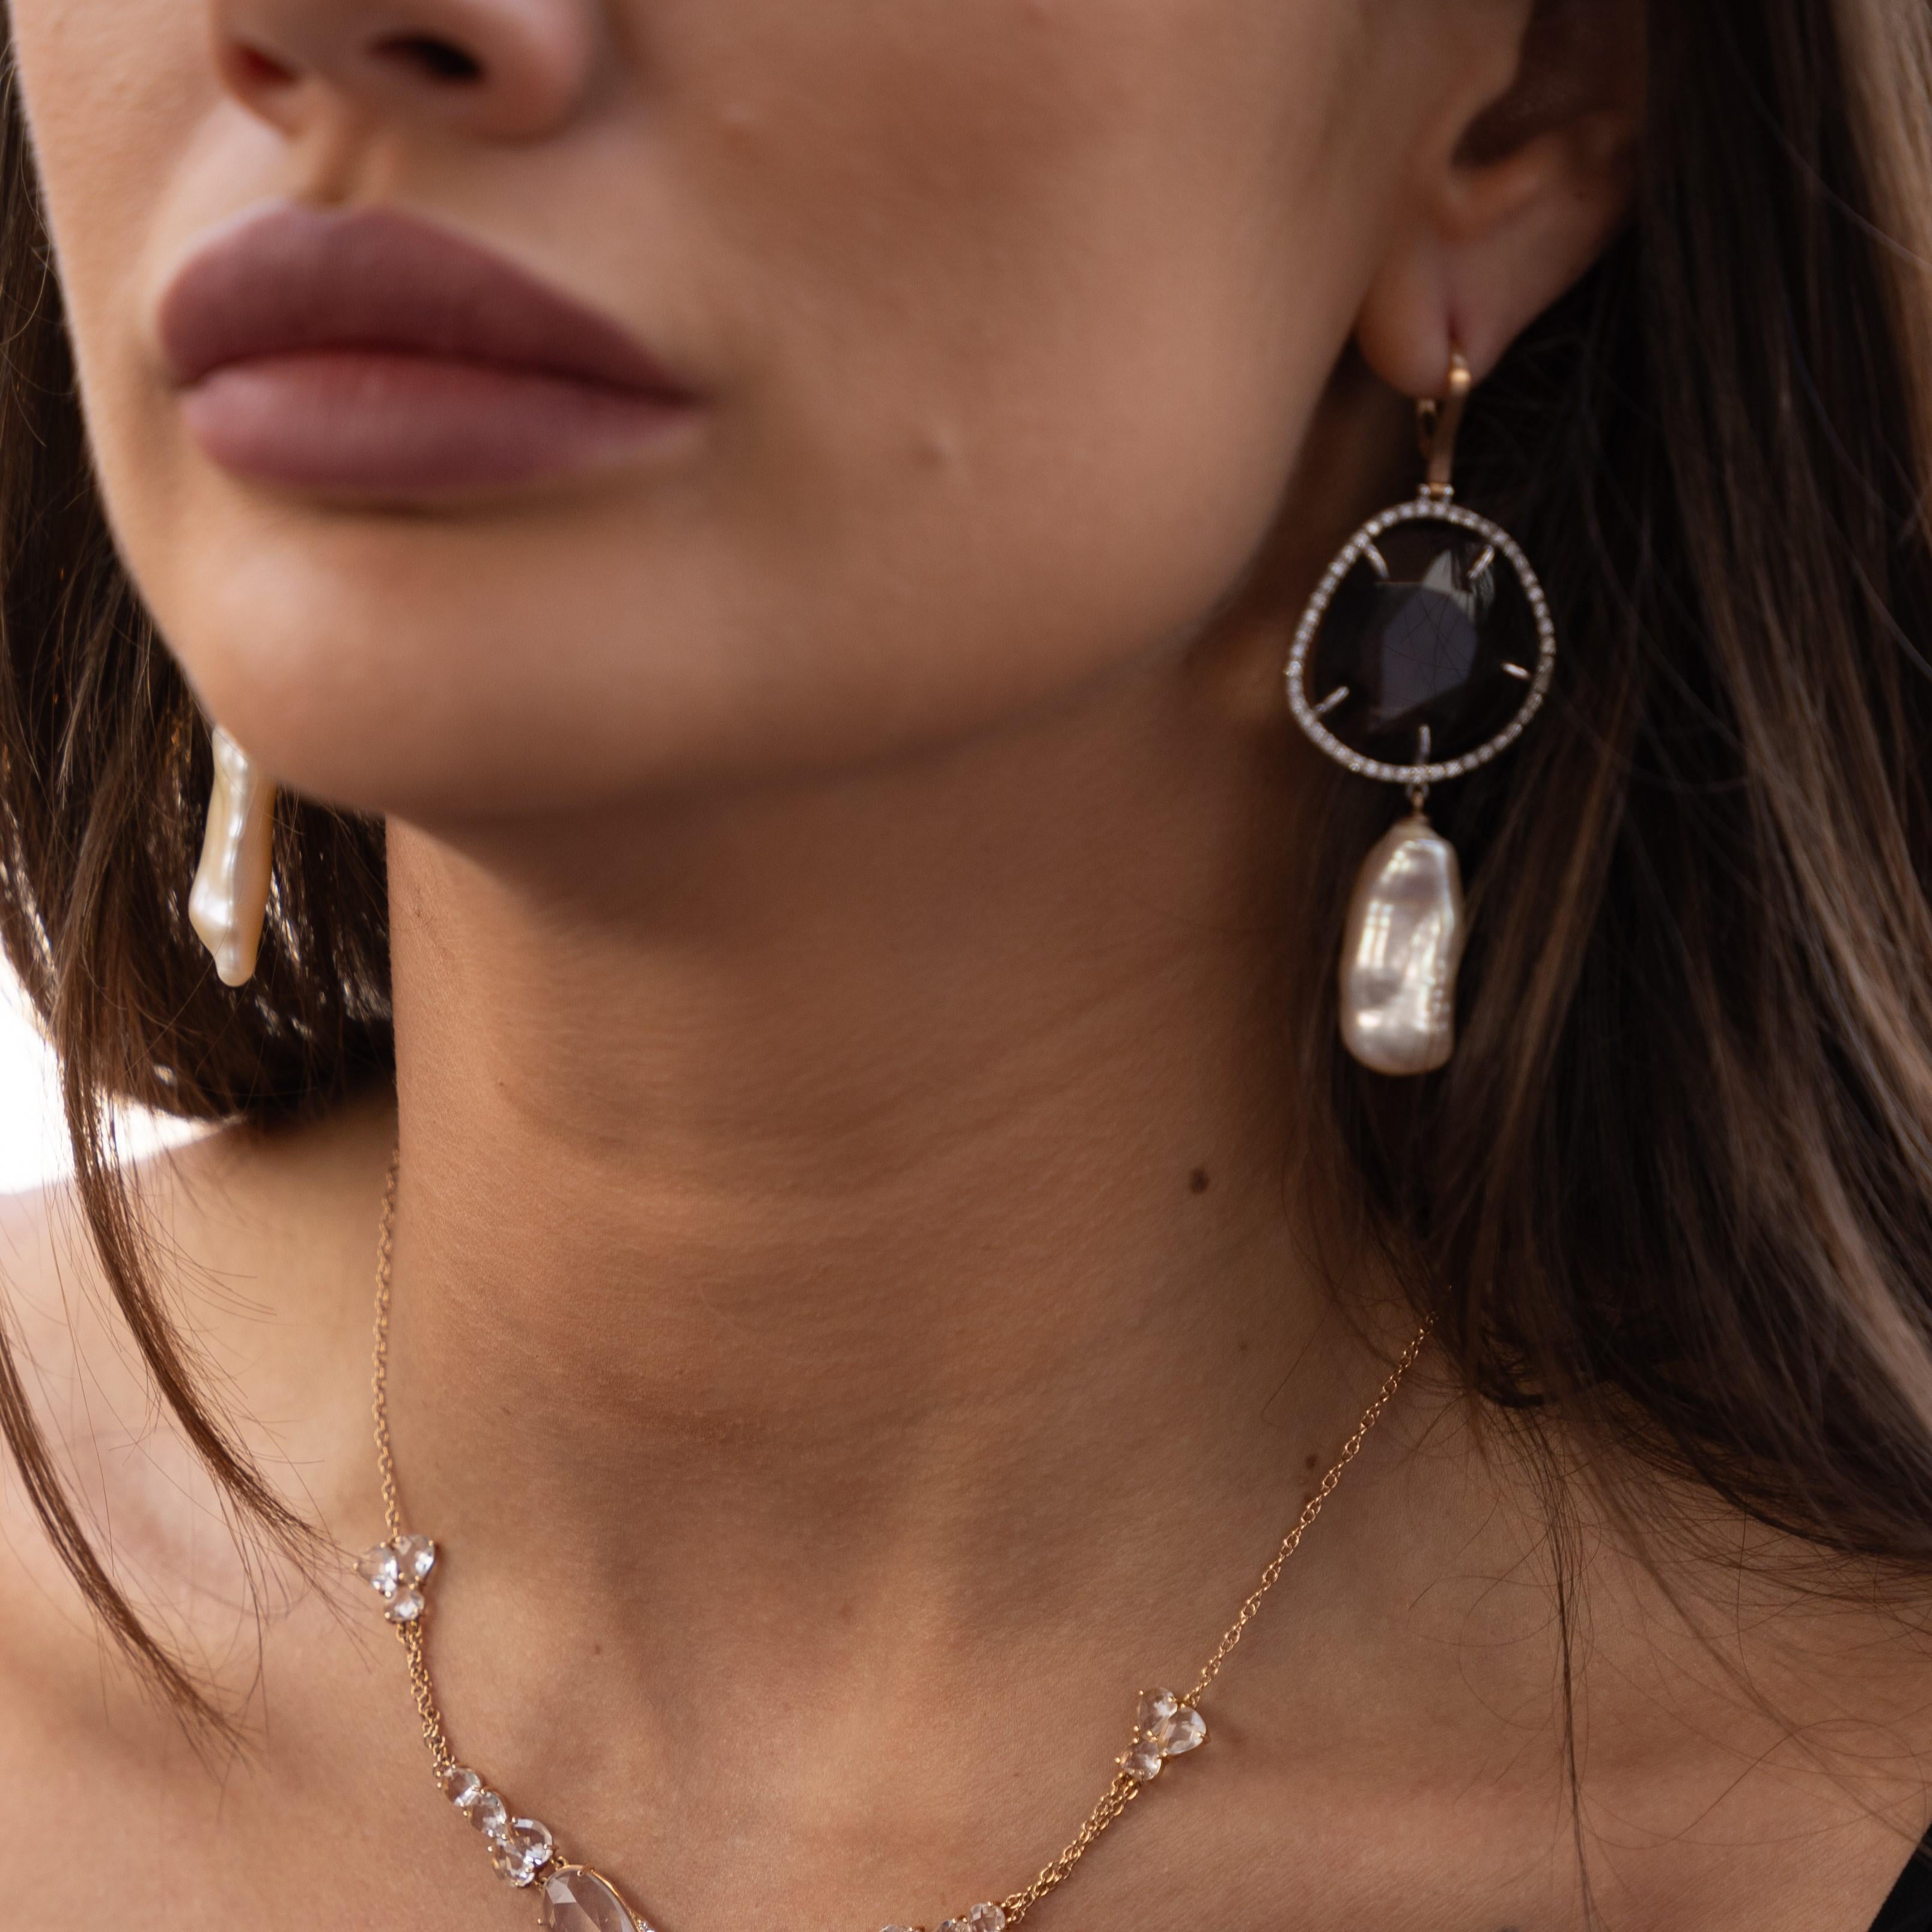 These earrings are crafted by Italian artisans in 18KT gold and feature a stunning combination of smoky quartz, diamonds, and keshi pearls. The smoky quartz gemstones add a touch of warmth and sophistication to the design. The diamonds, known for